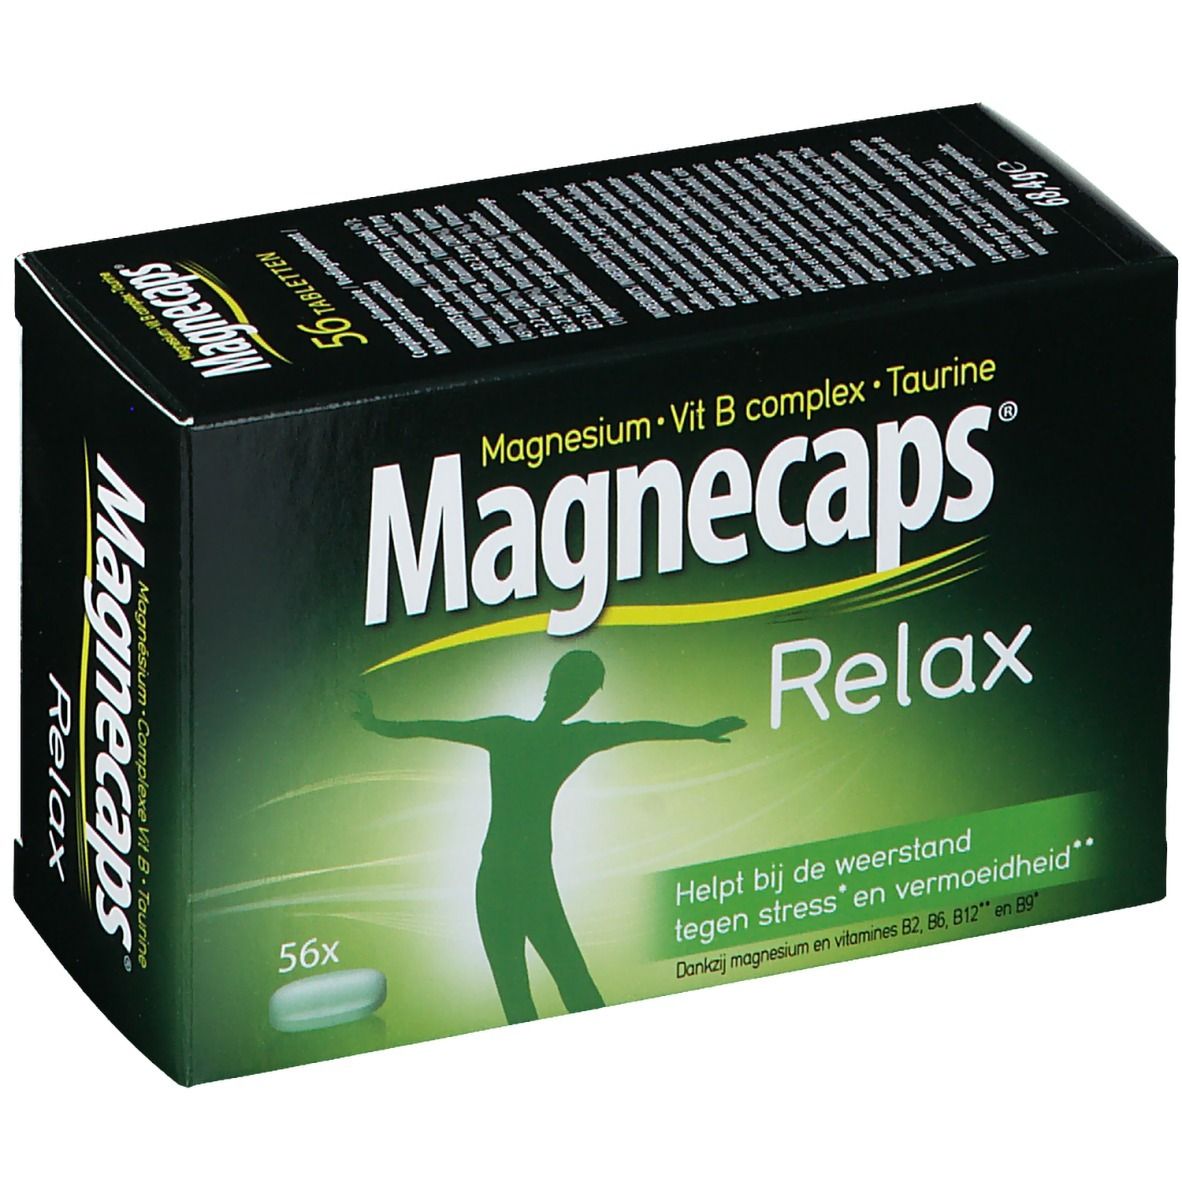 Magnecaps Relax